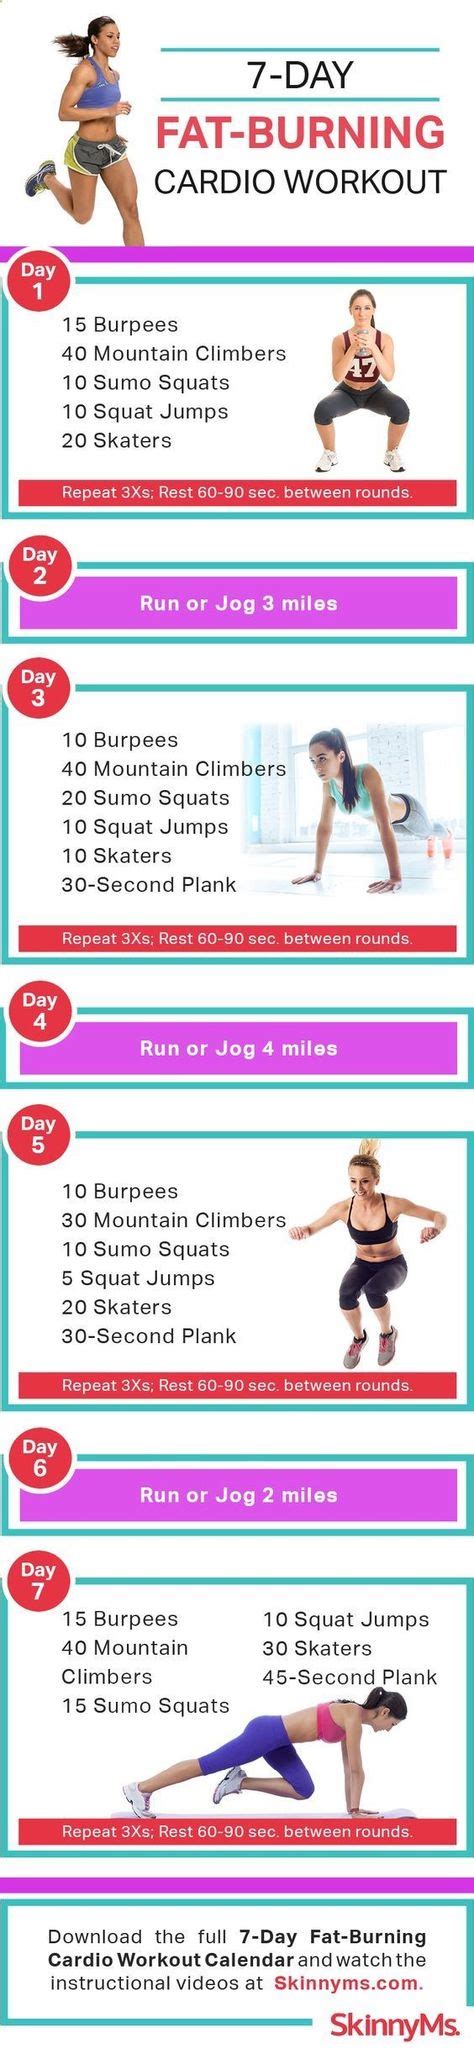 Minutes A Day Fat Burning Day Fat Burning Cardio Workout Start Today Skinnyms Cardio